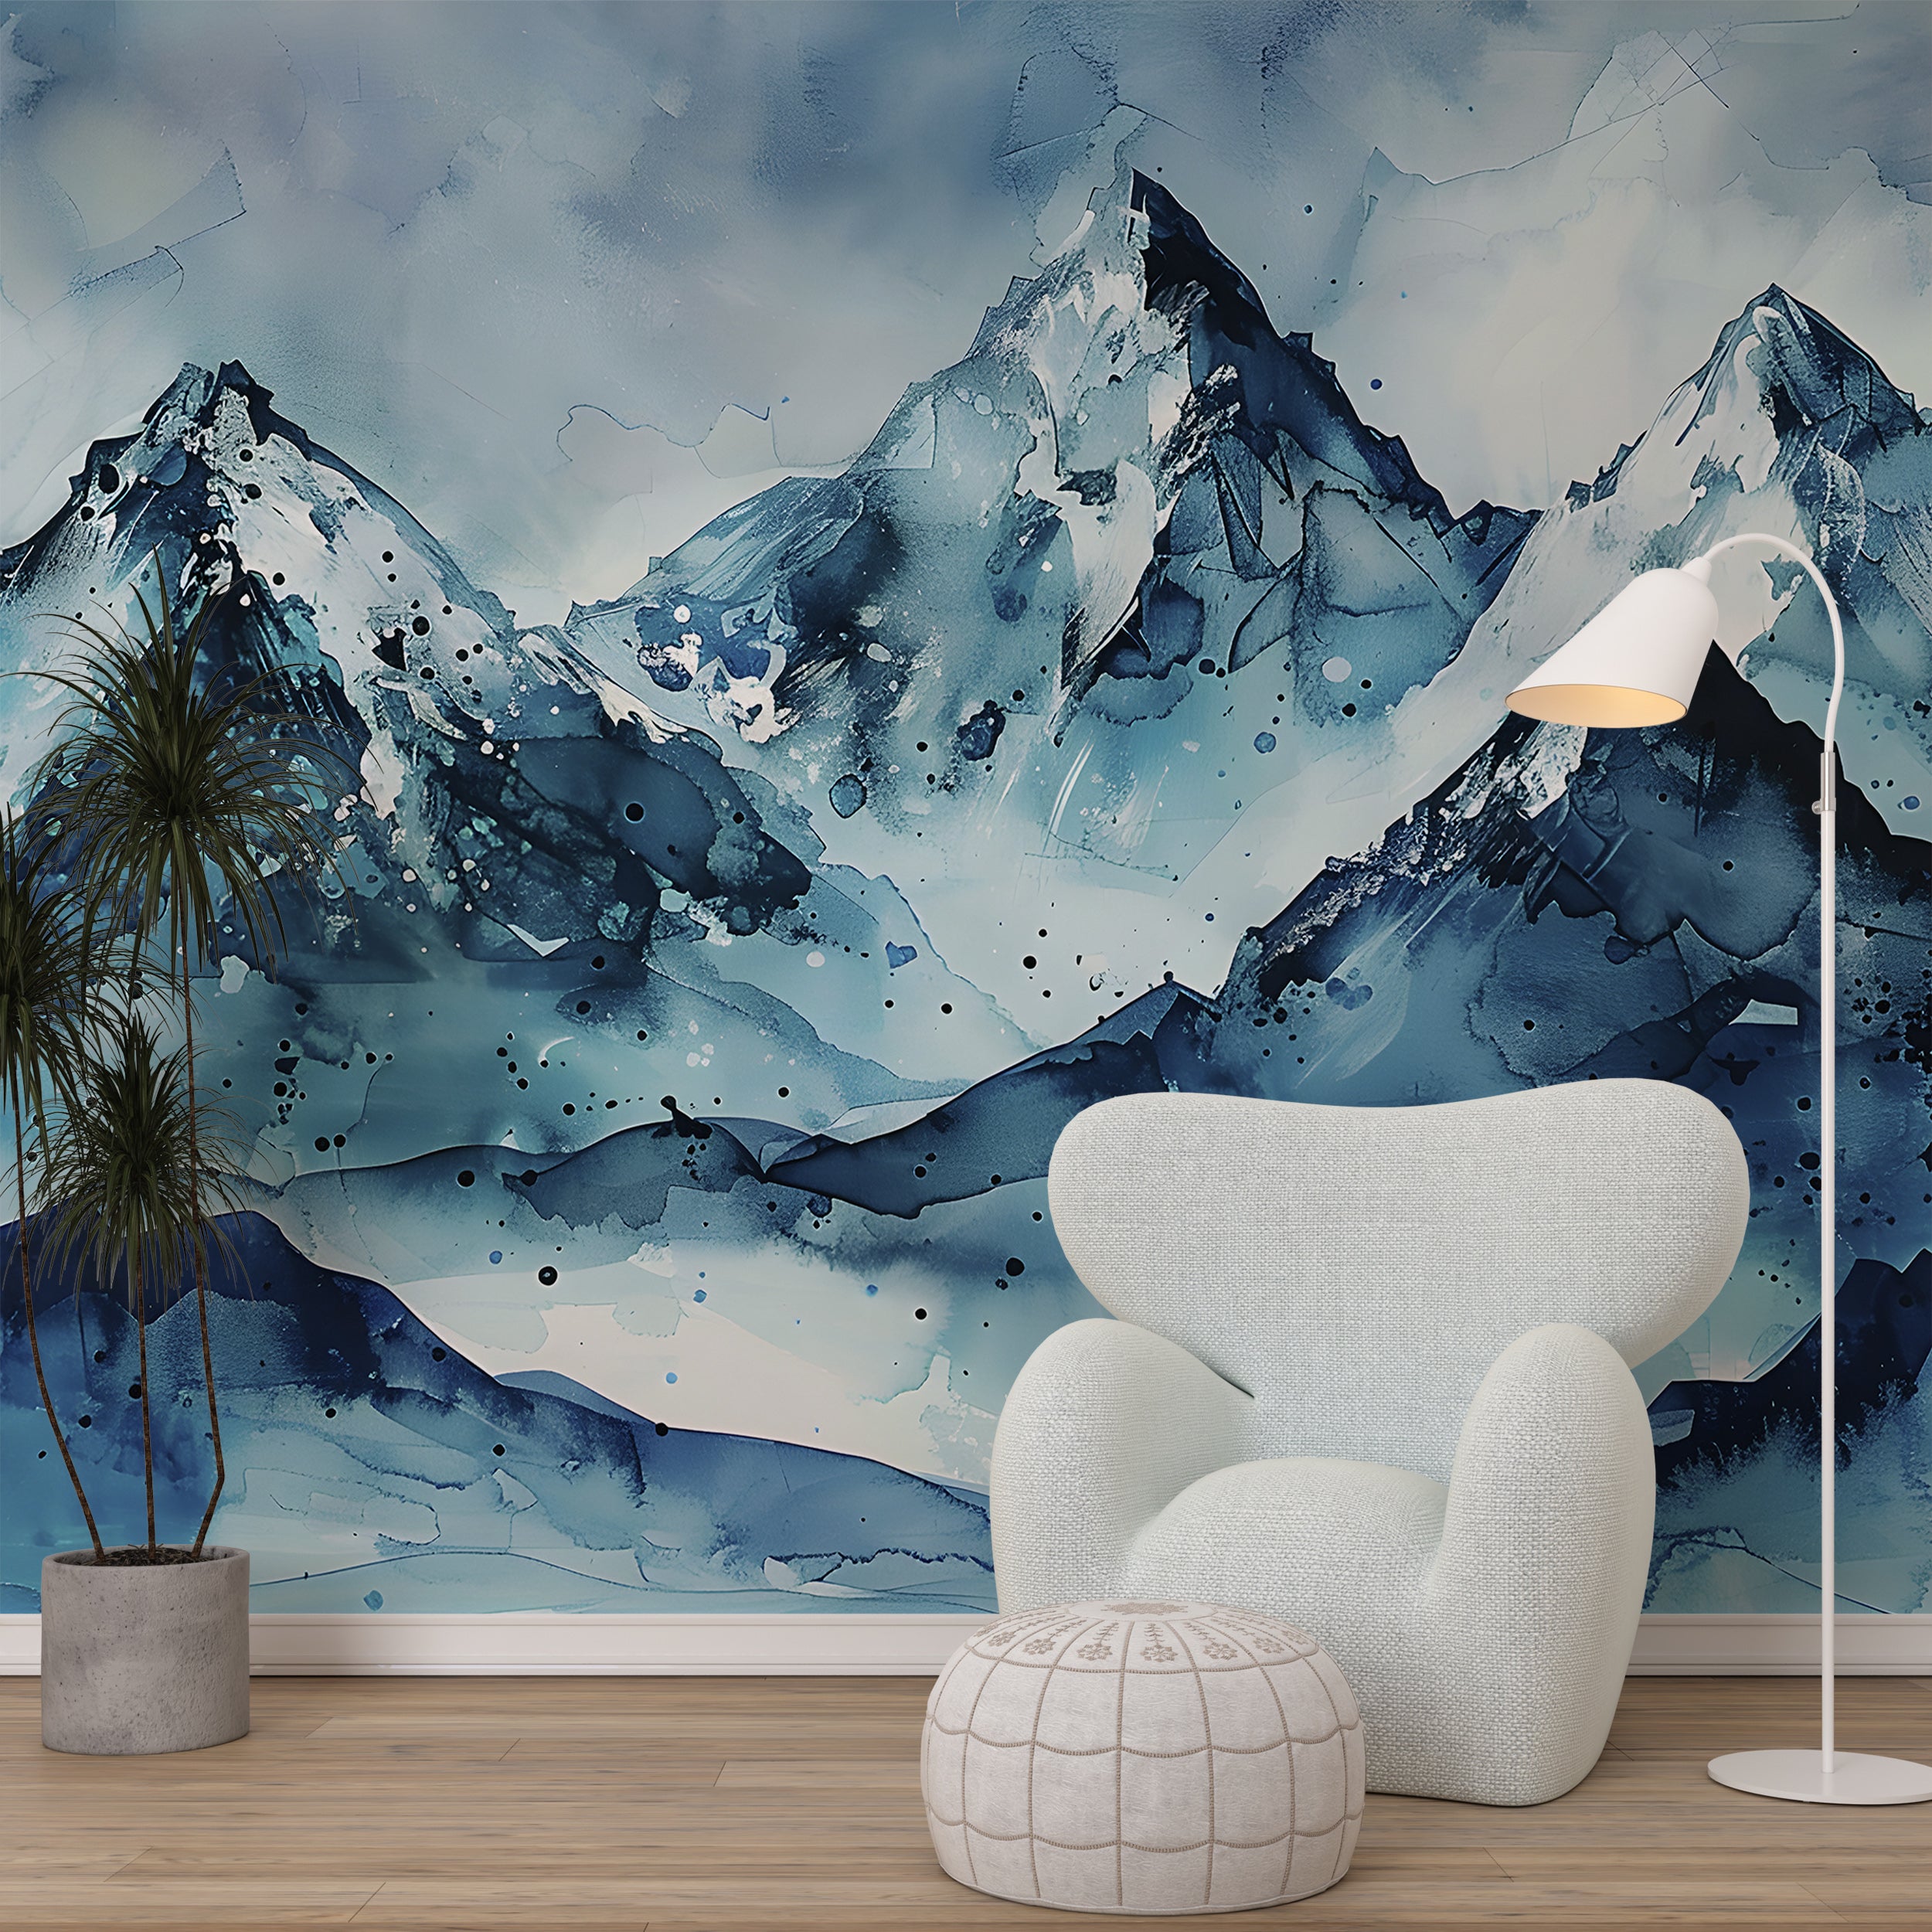 Snowy Mountains Mural, Abstract Blue Mountains Wall Art, Peel and Stick Cold Blue Wallpaper, Watercolor Removable Iced Landscape Decal